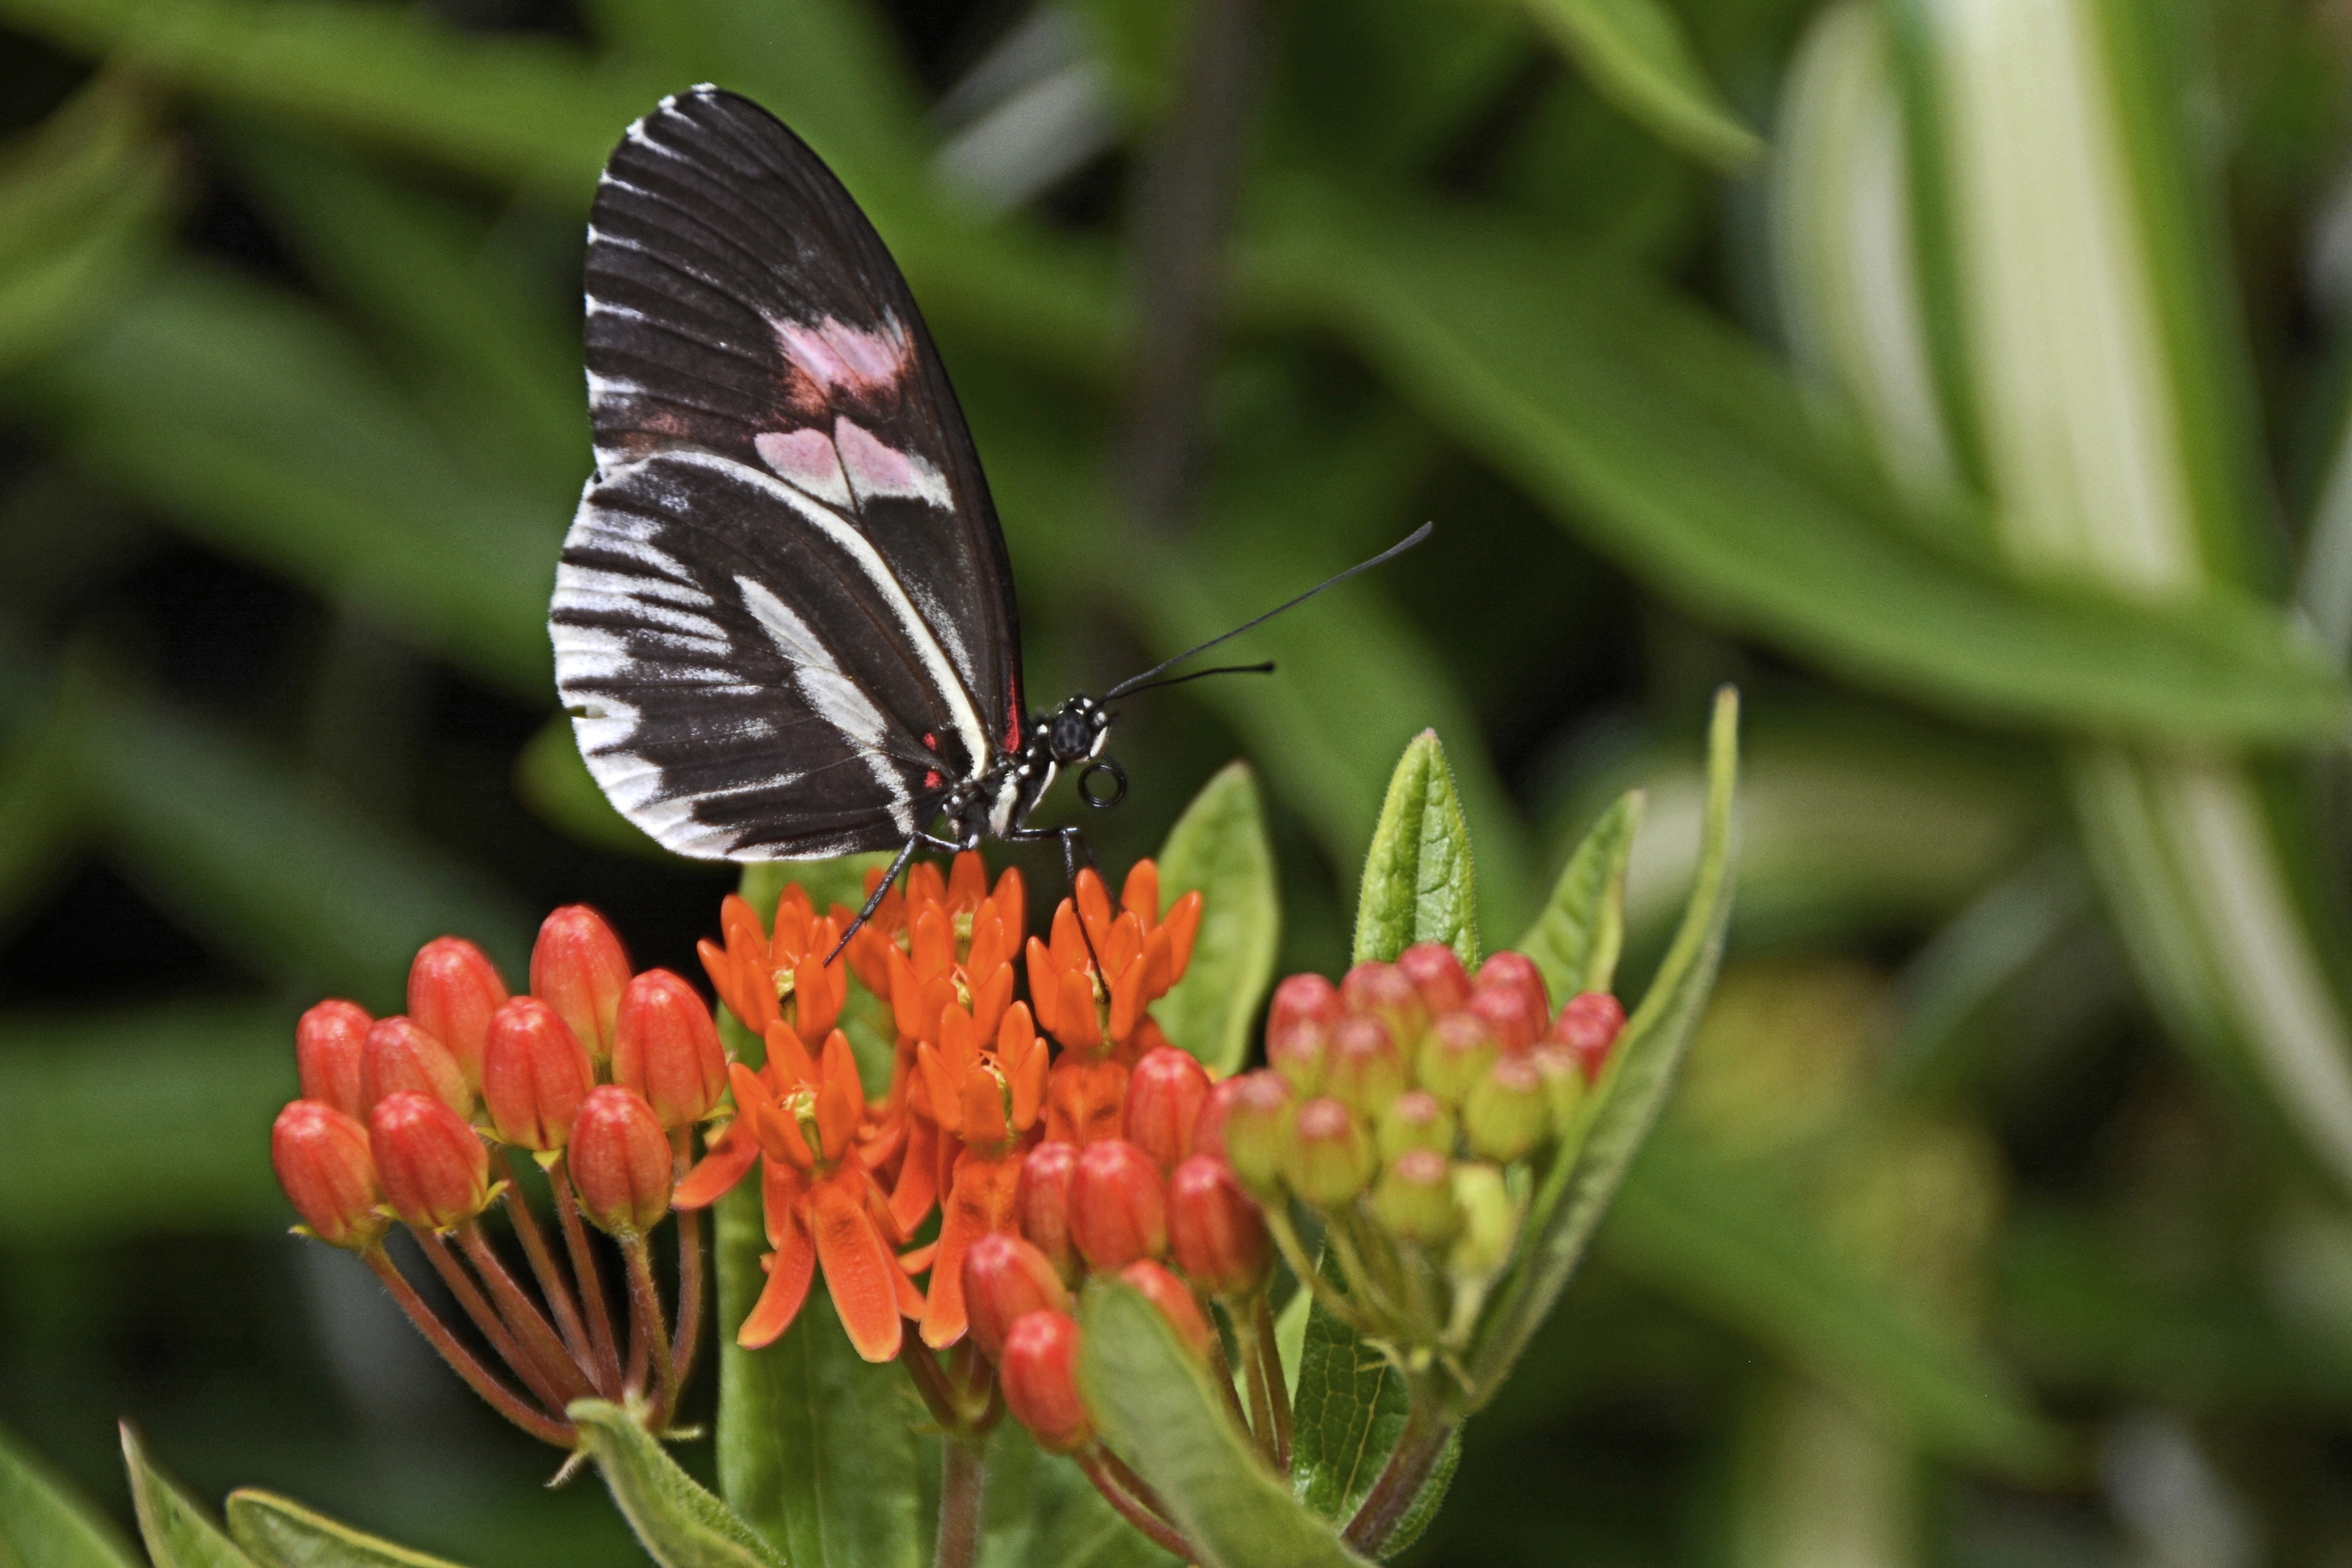 black and white spotted butterfly